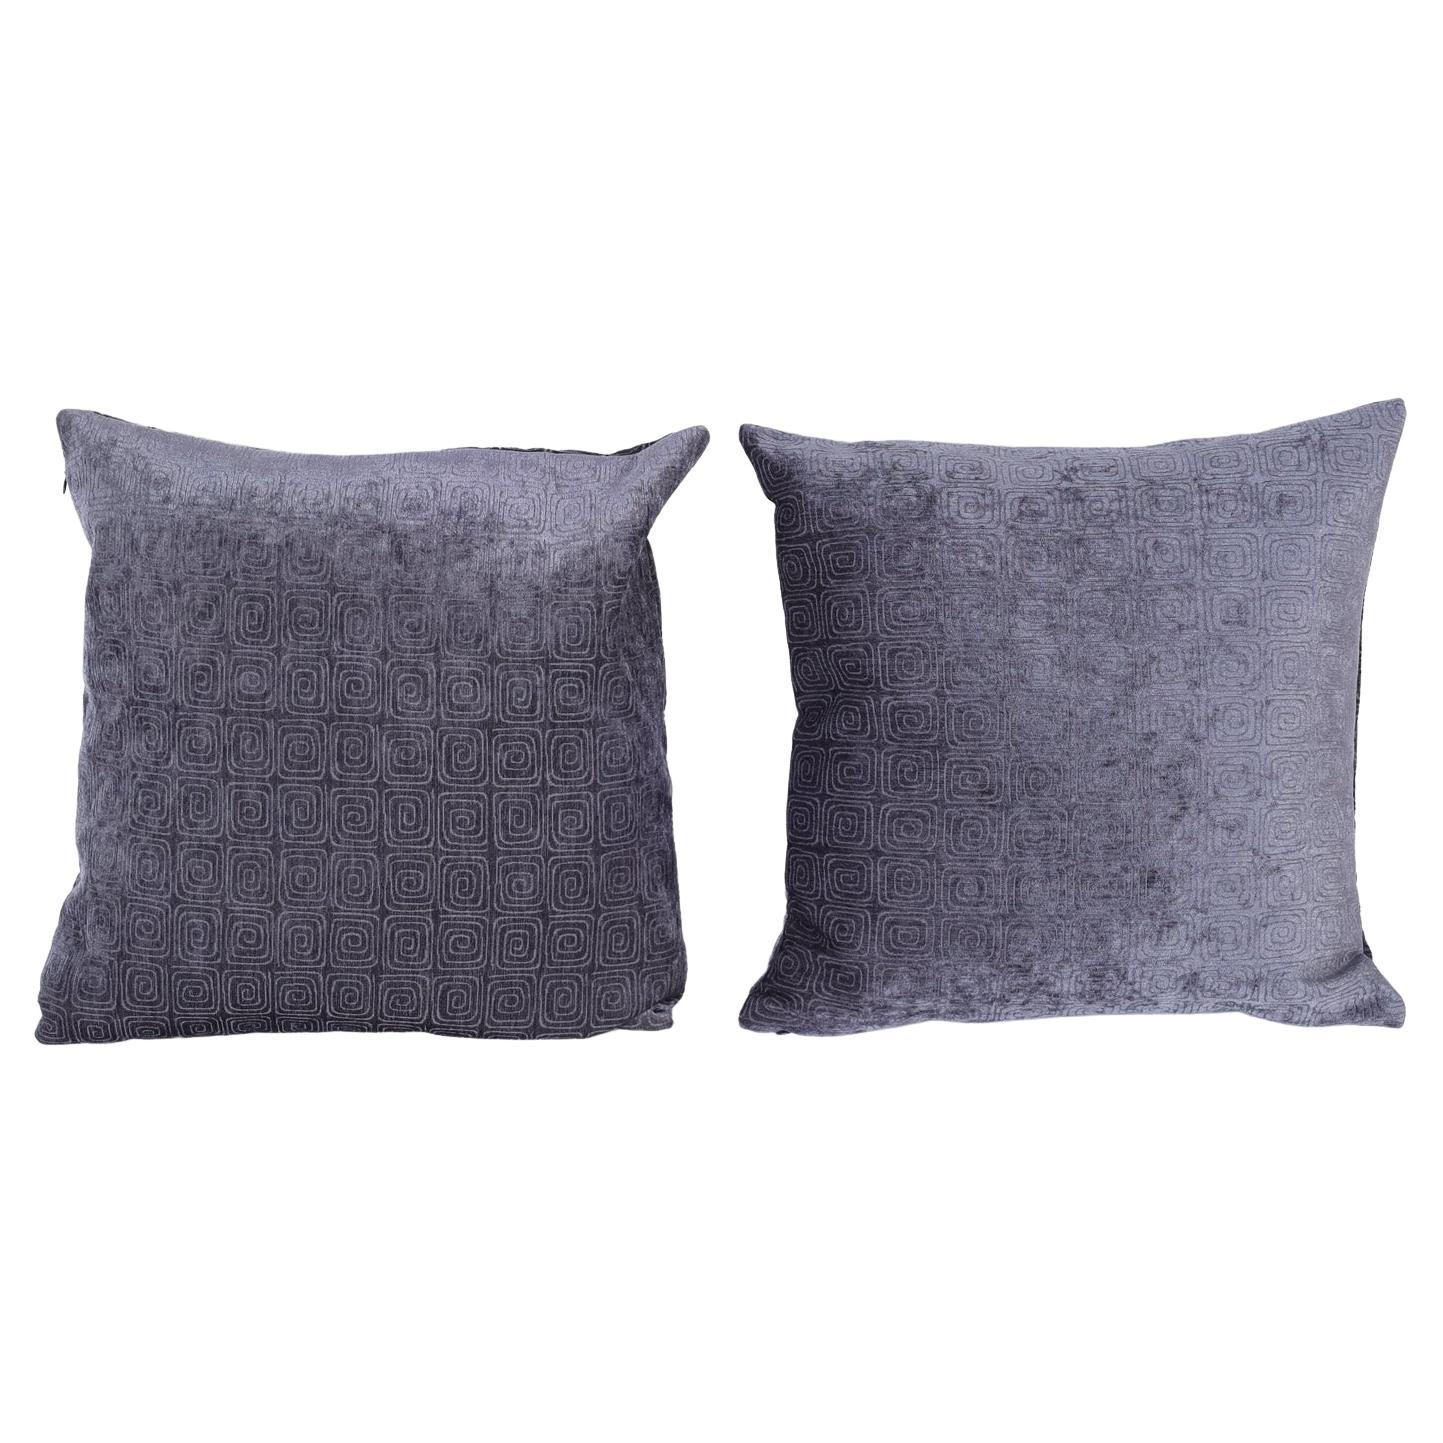 Pair of Pillows with a Modern Design, Priced Individually For Sale